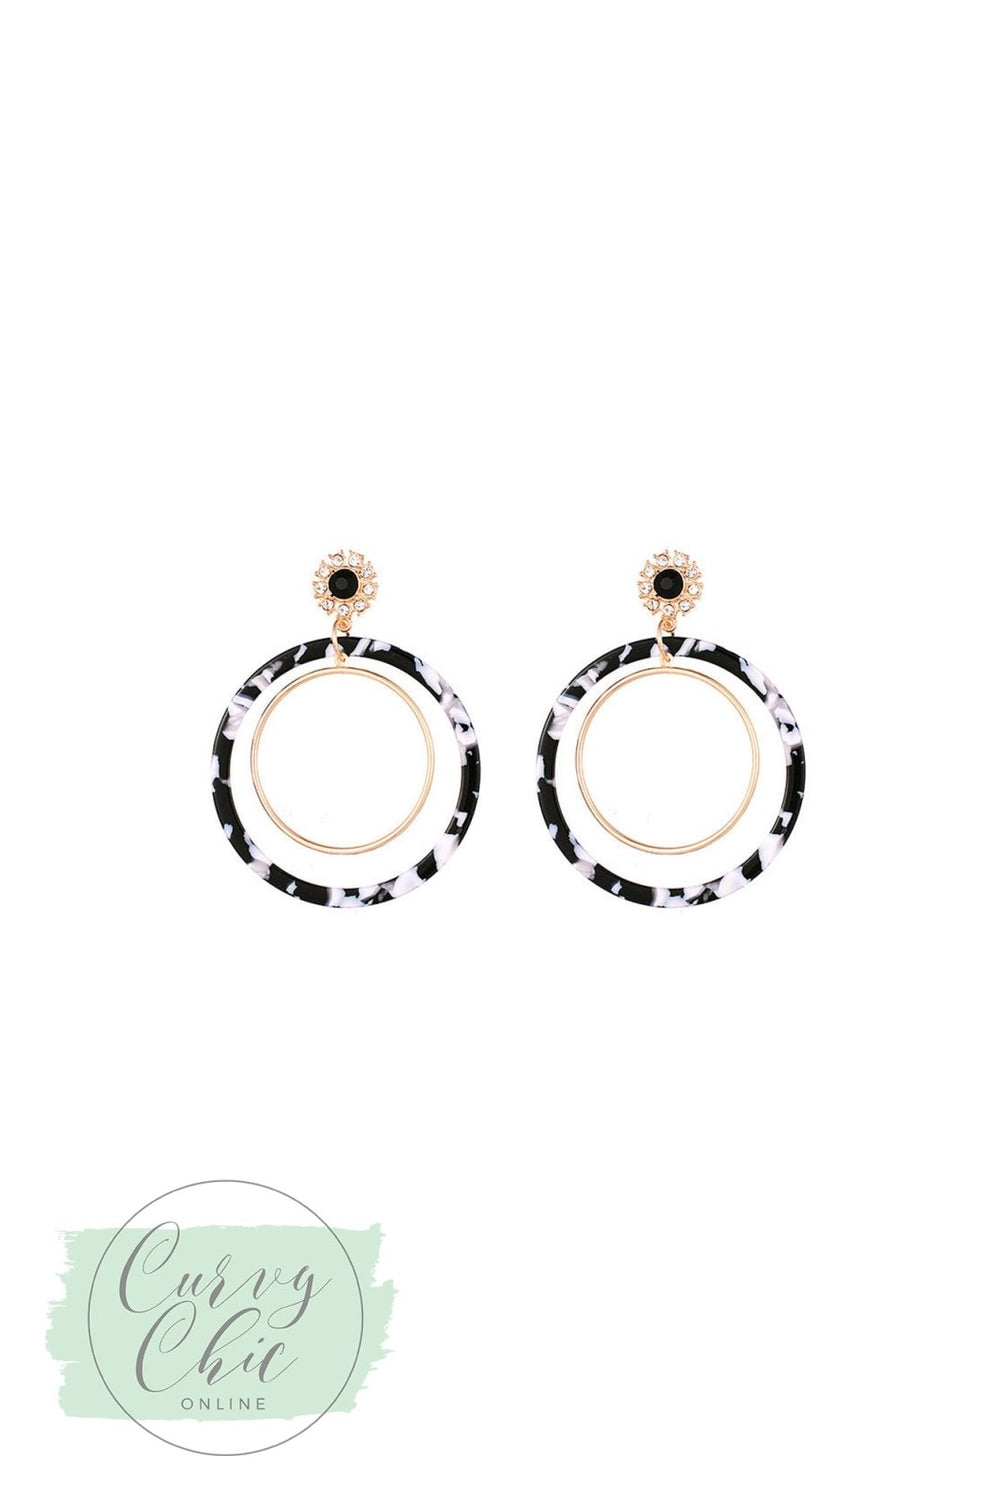 Double Hoop Black Tortoiseshell and Gold Earrings - Curvy Chic Boutique